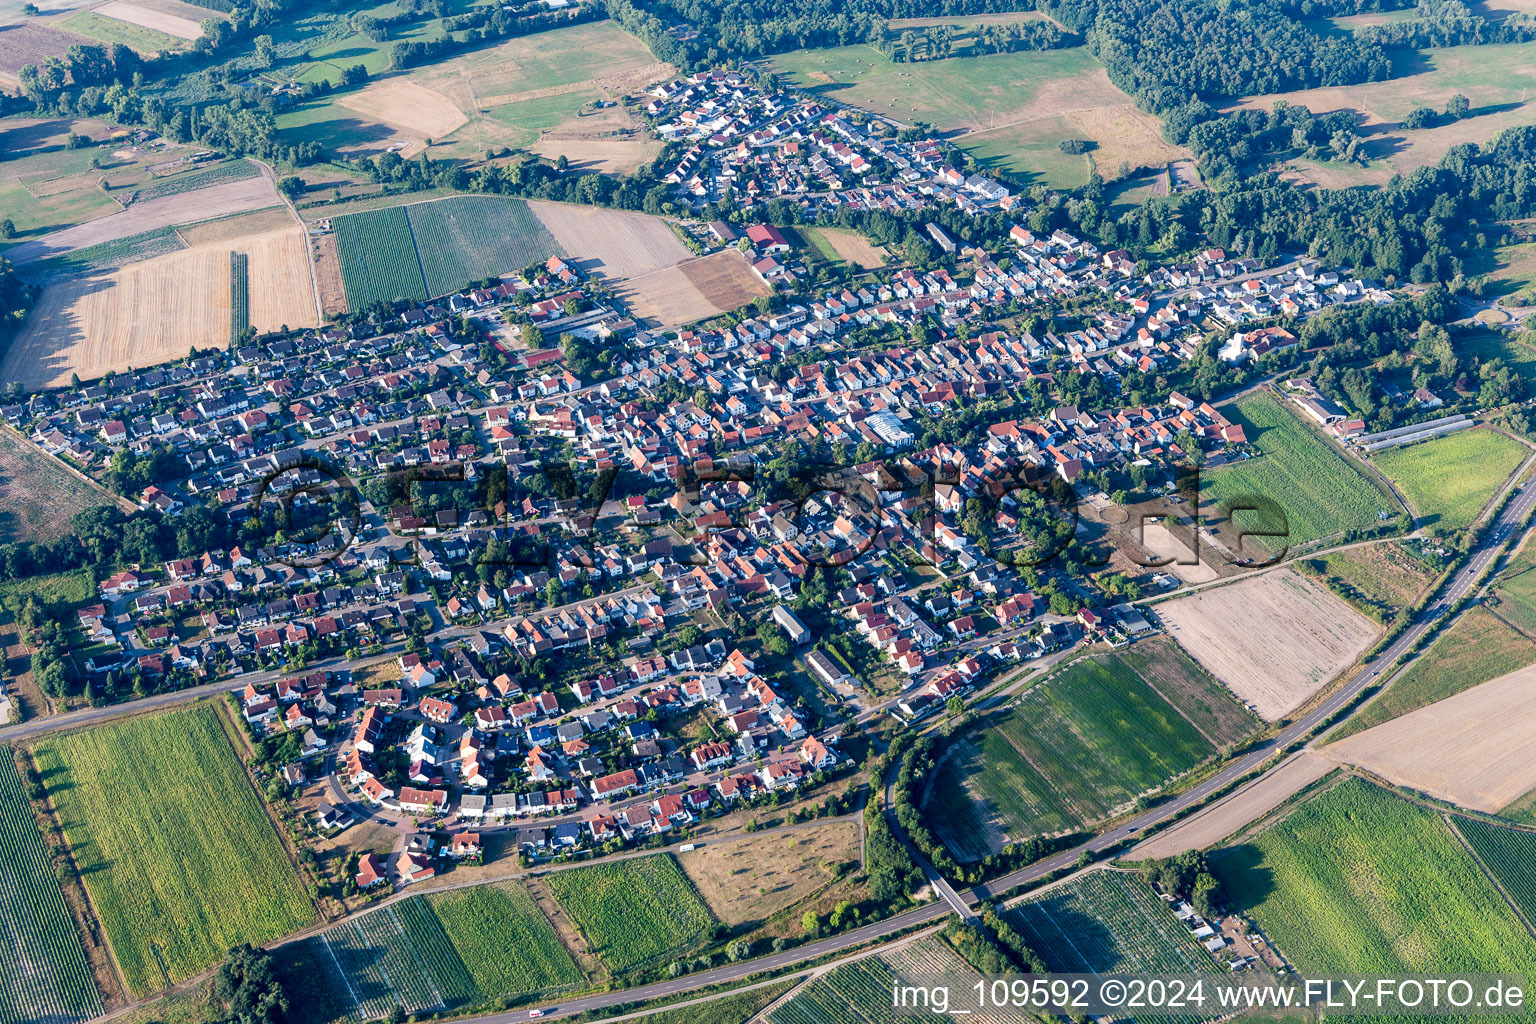 Aerial view of Agricultural land and field borders surround the settlement area of the village in Hanhofen in the state Rhineland-Palatinate, Germany